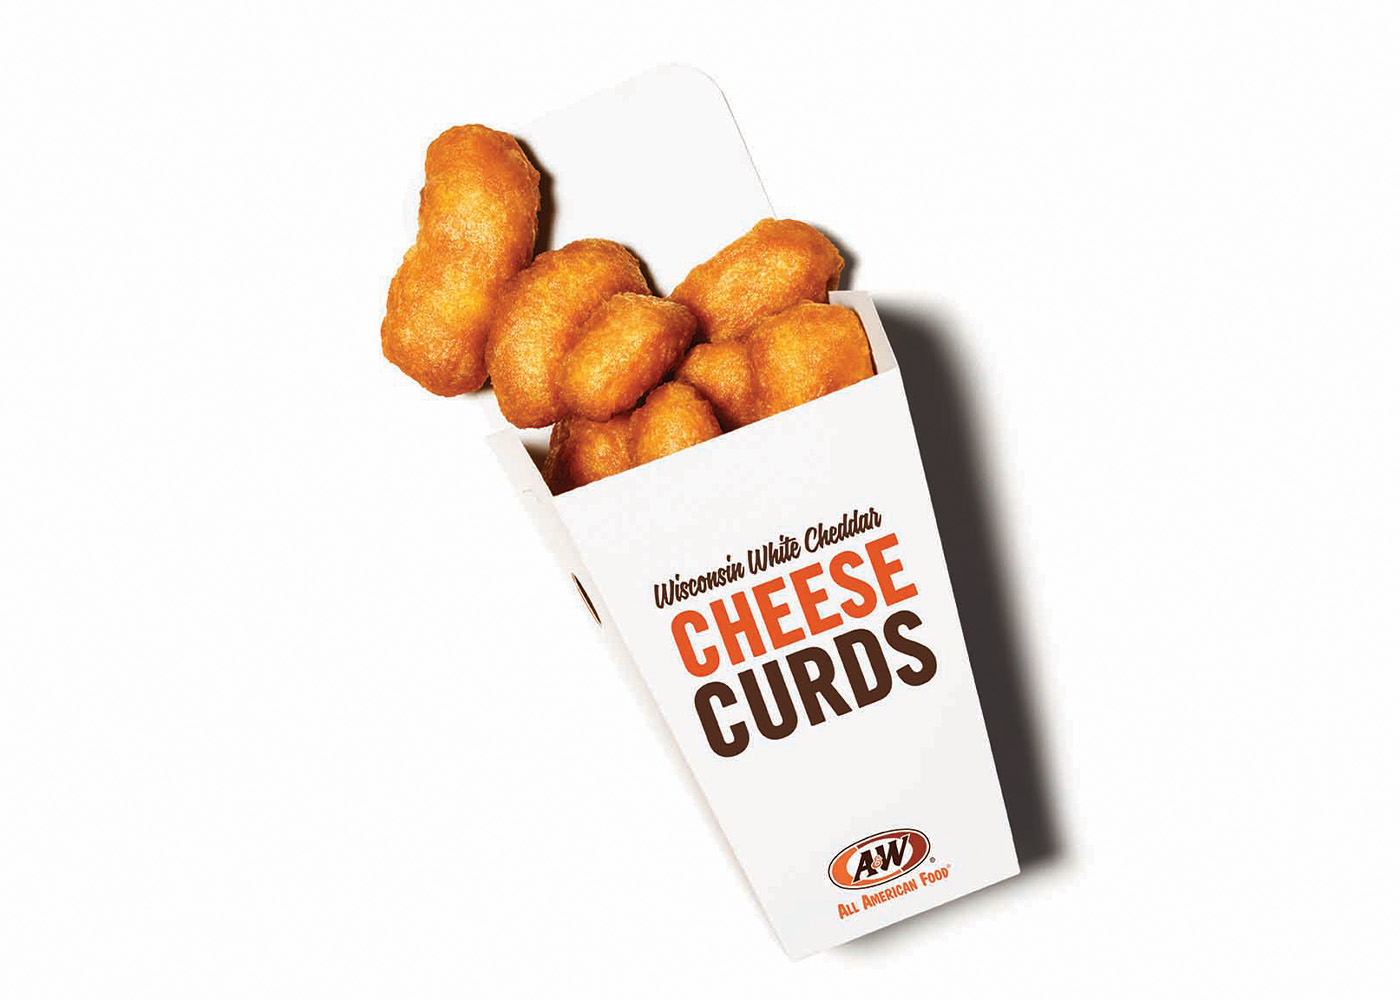 Sriracha Cheese Curds spilling out of a Cheese Curd box.